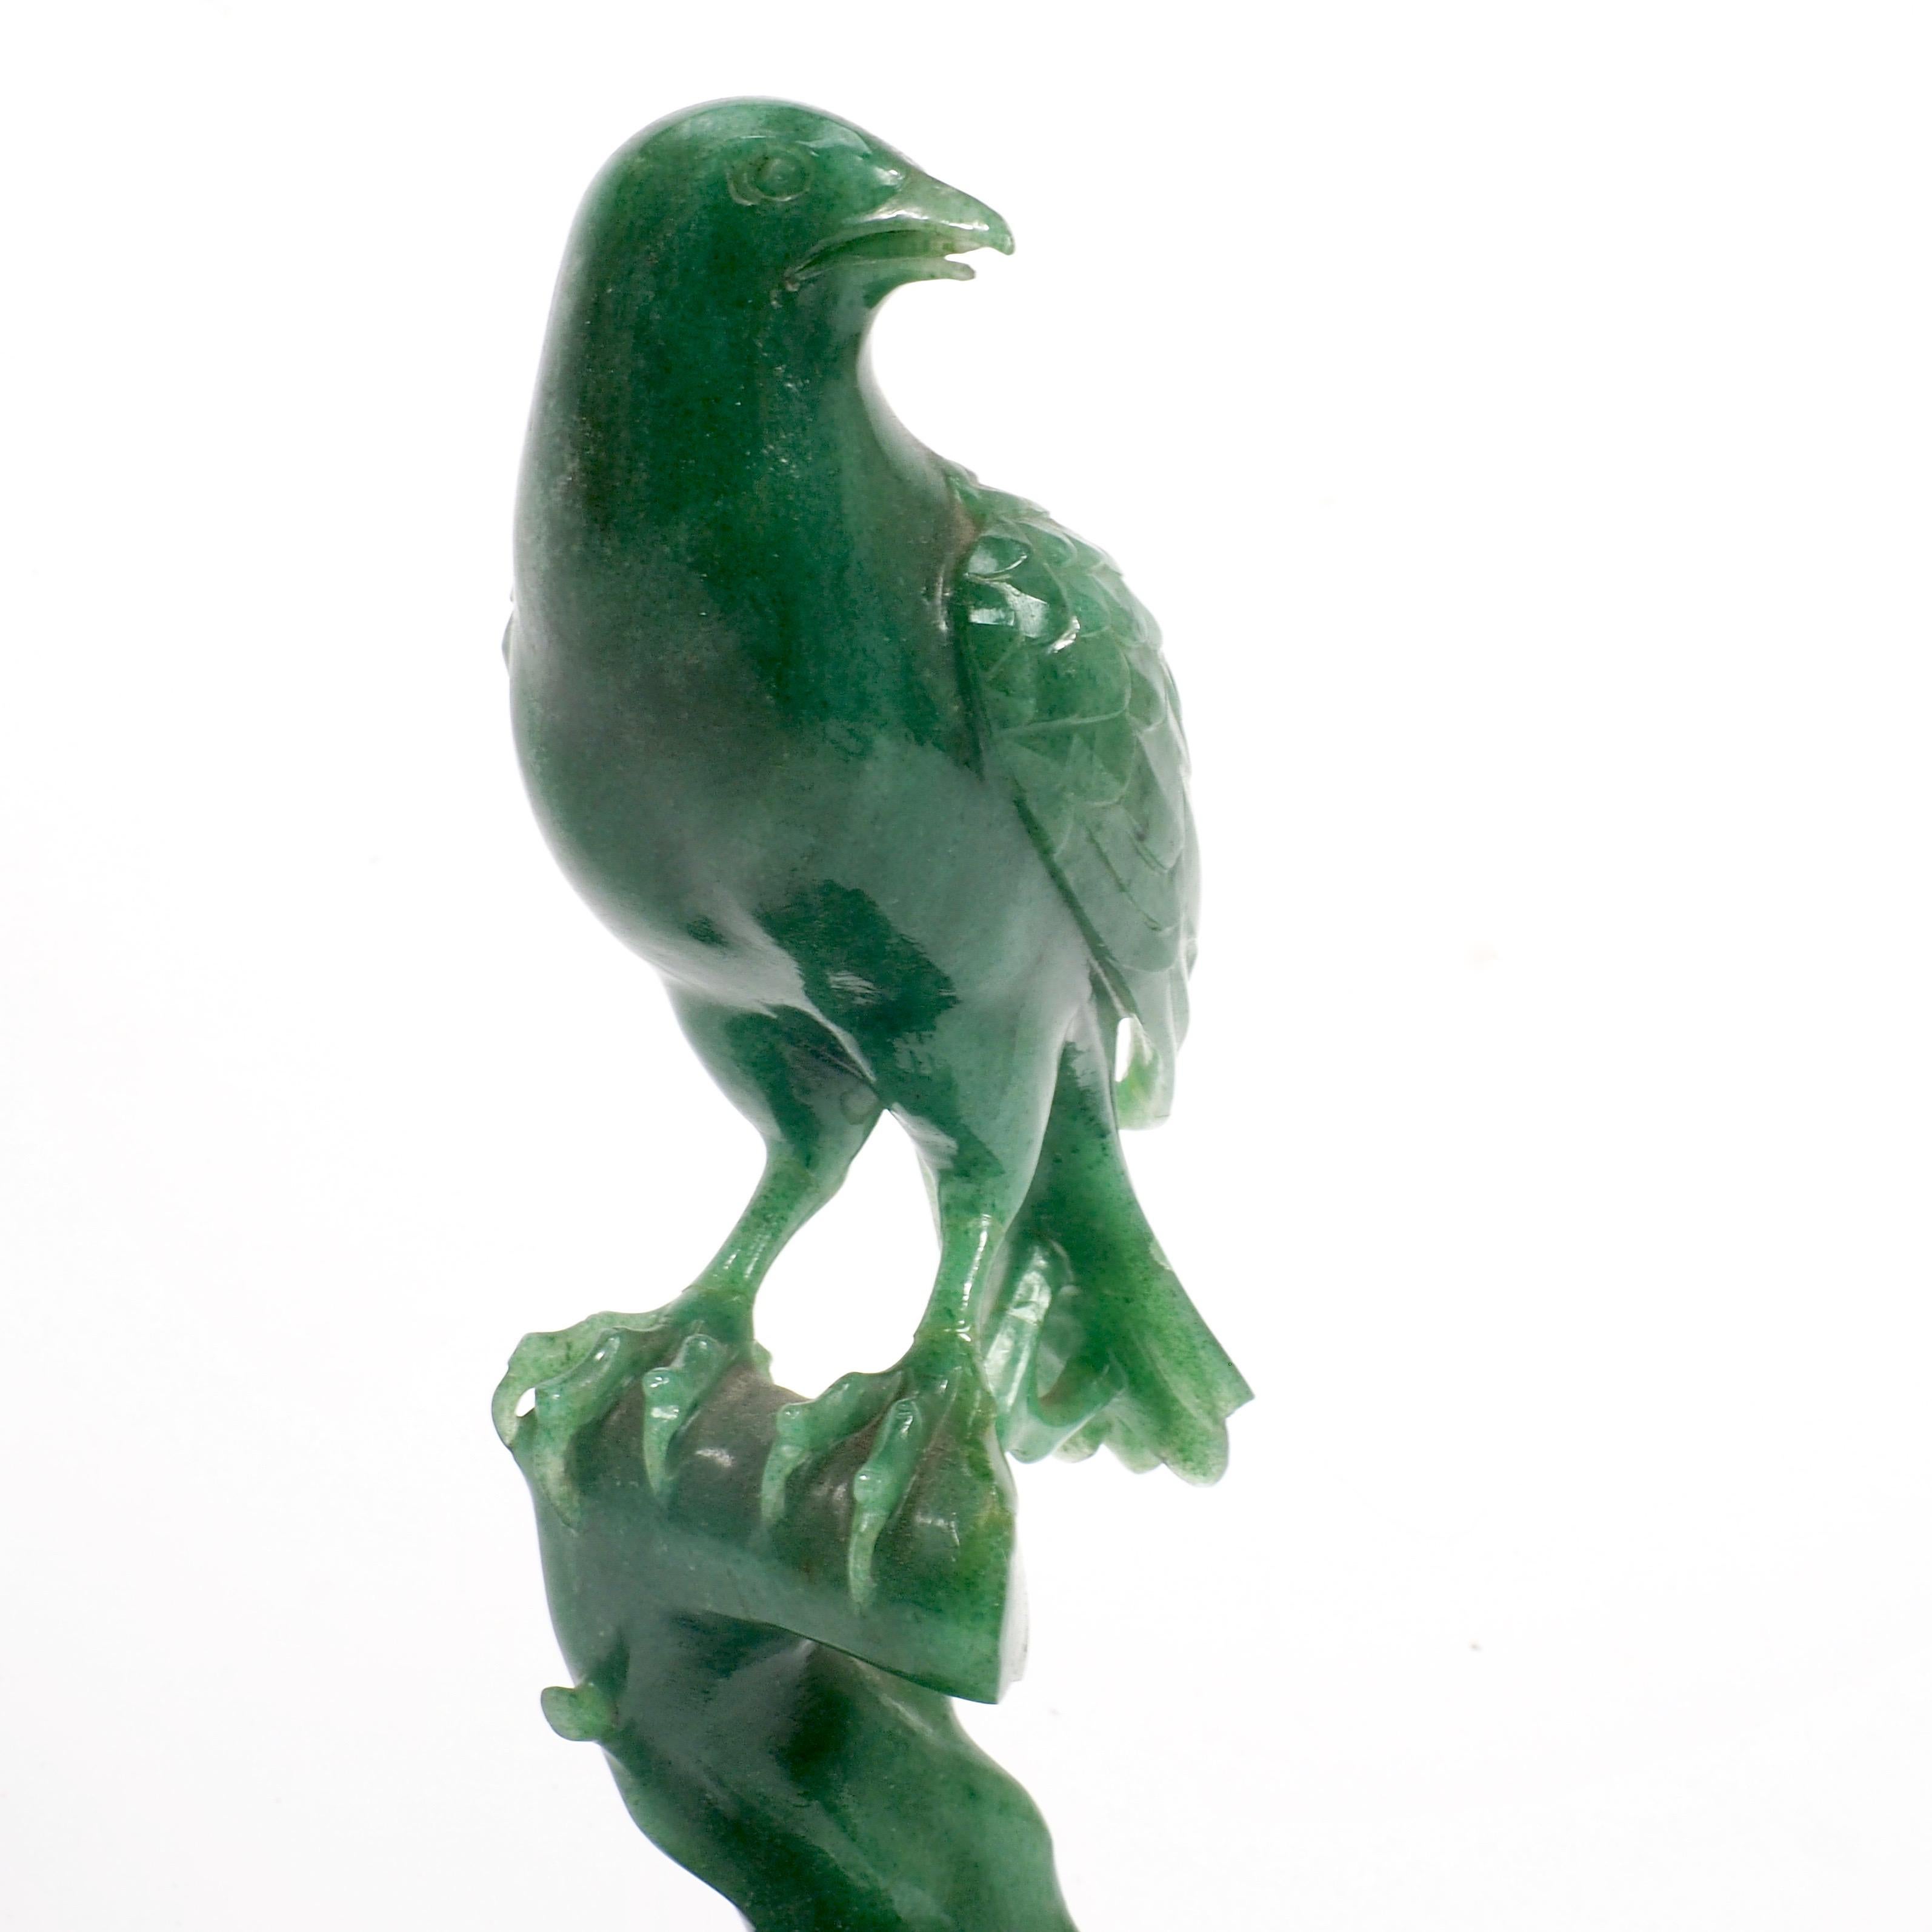 Exquisitely carved jade songbird of the late Qing dynasty, circa 1900. Made of vivid green Feicui or Kingfisher Jade which became a favourite of the Qing dynasty. The base of carved fruitwood has been repaired.